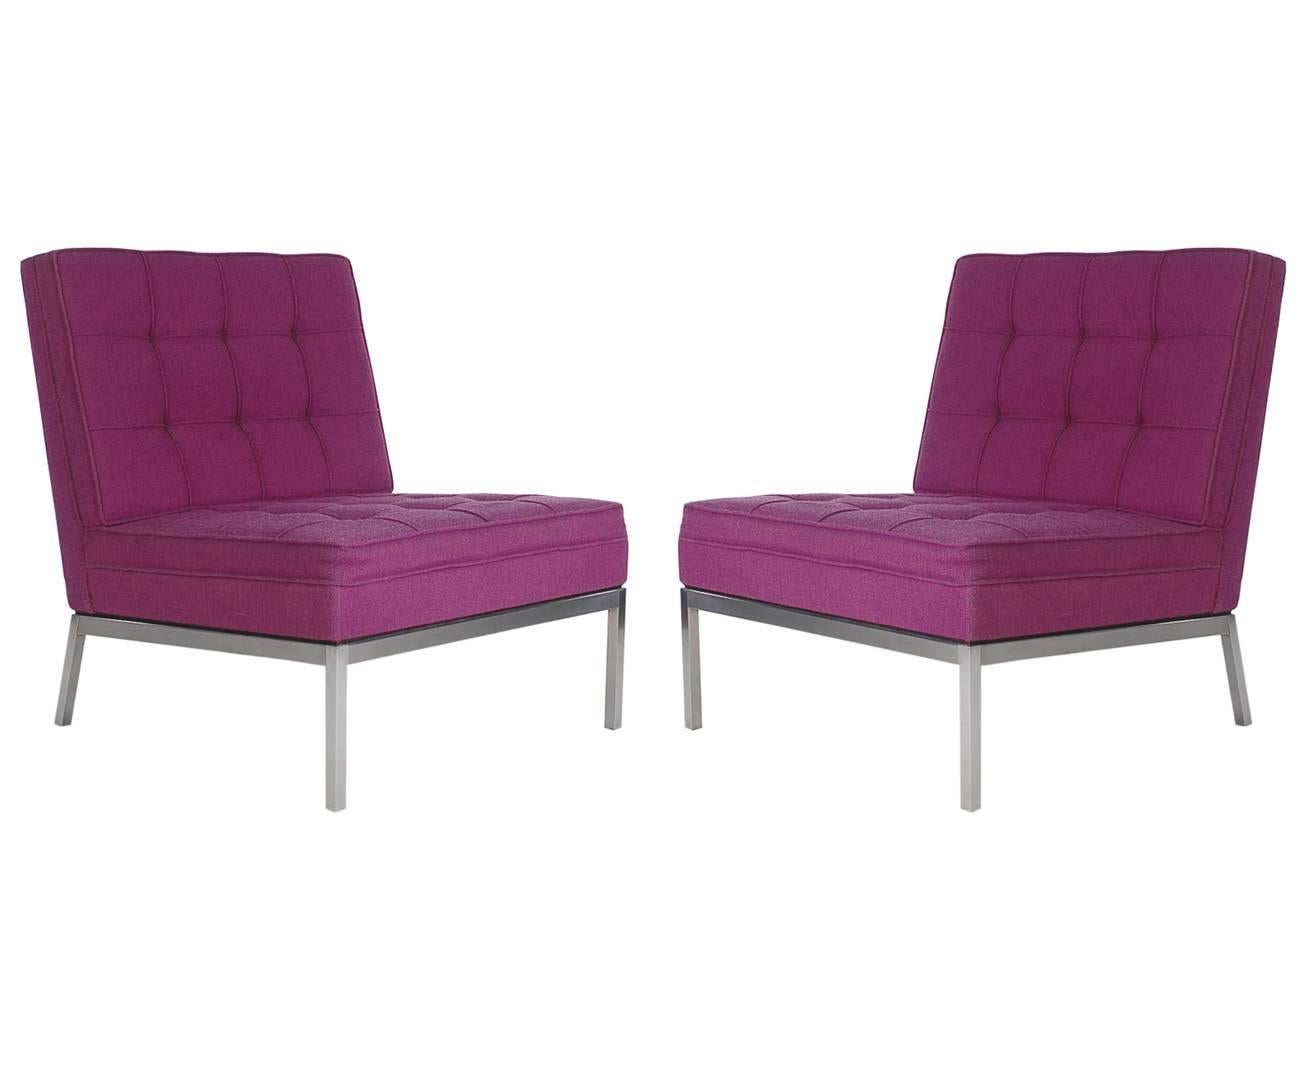 A sharp looking matching pair of slipper chairs designed by Florence Knoll and produced by Knoll Associates. They feature stainless steel frames and purple tweed upholstery.